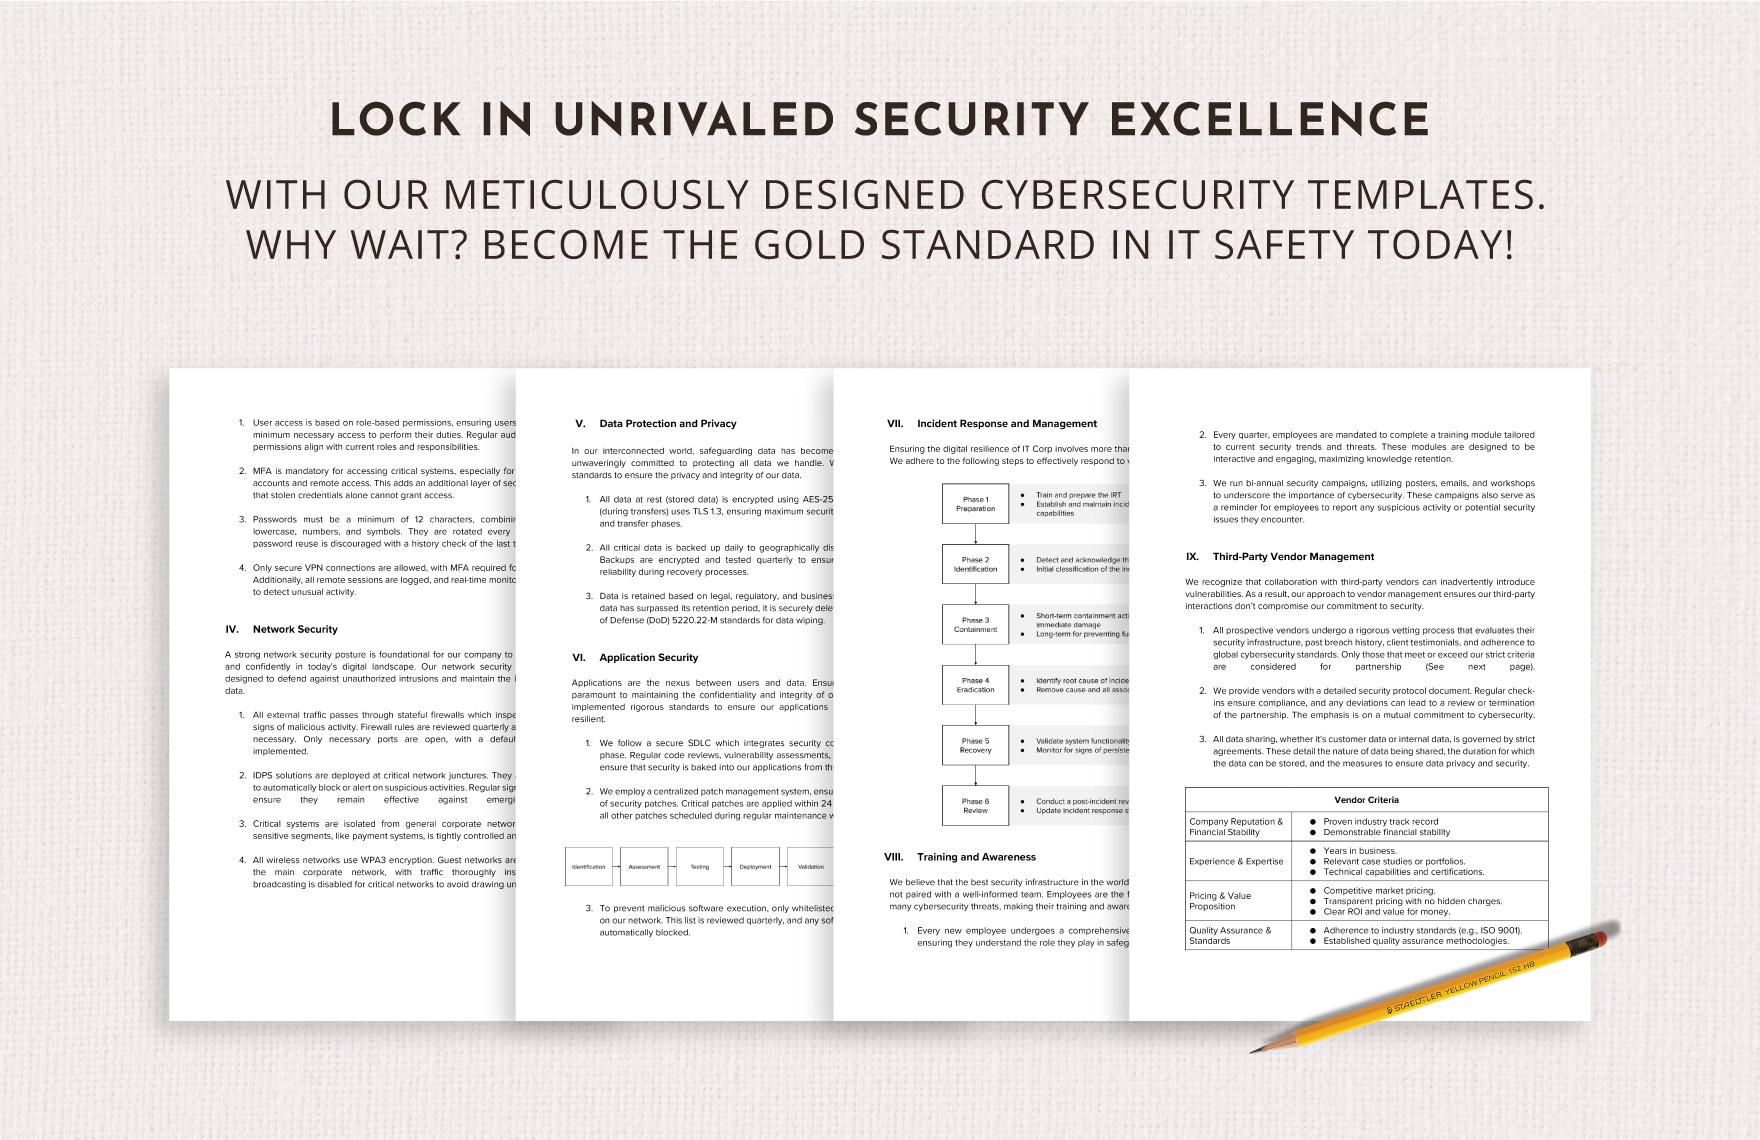 Cybersecurity Policy & Procedure Template